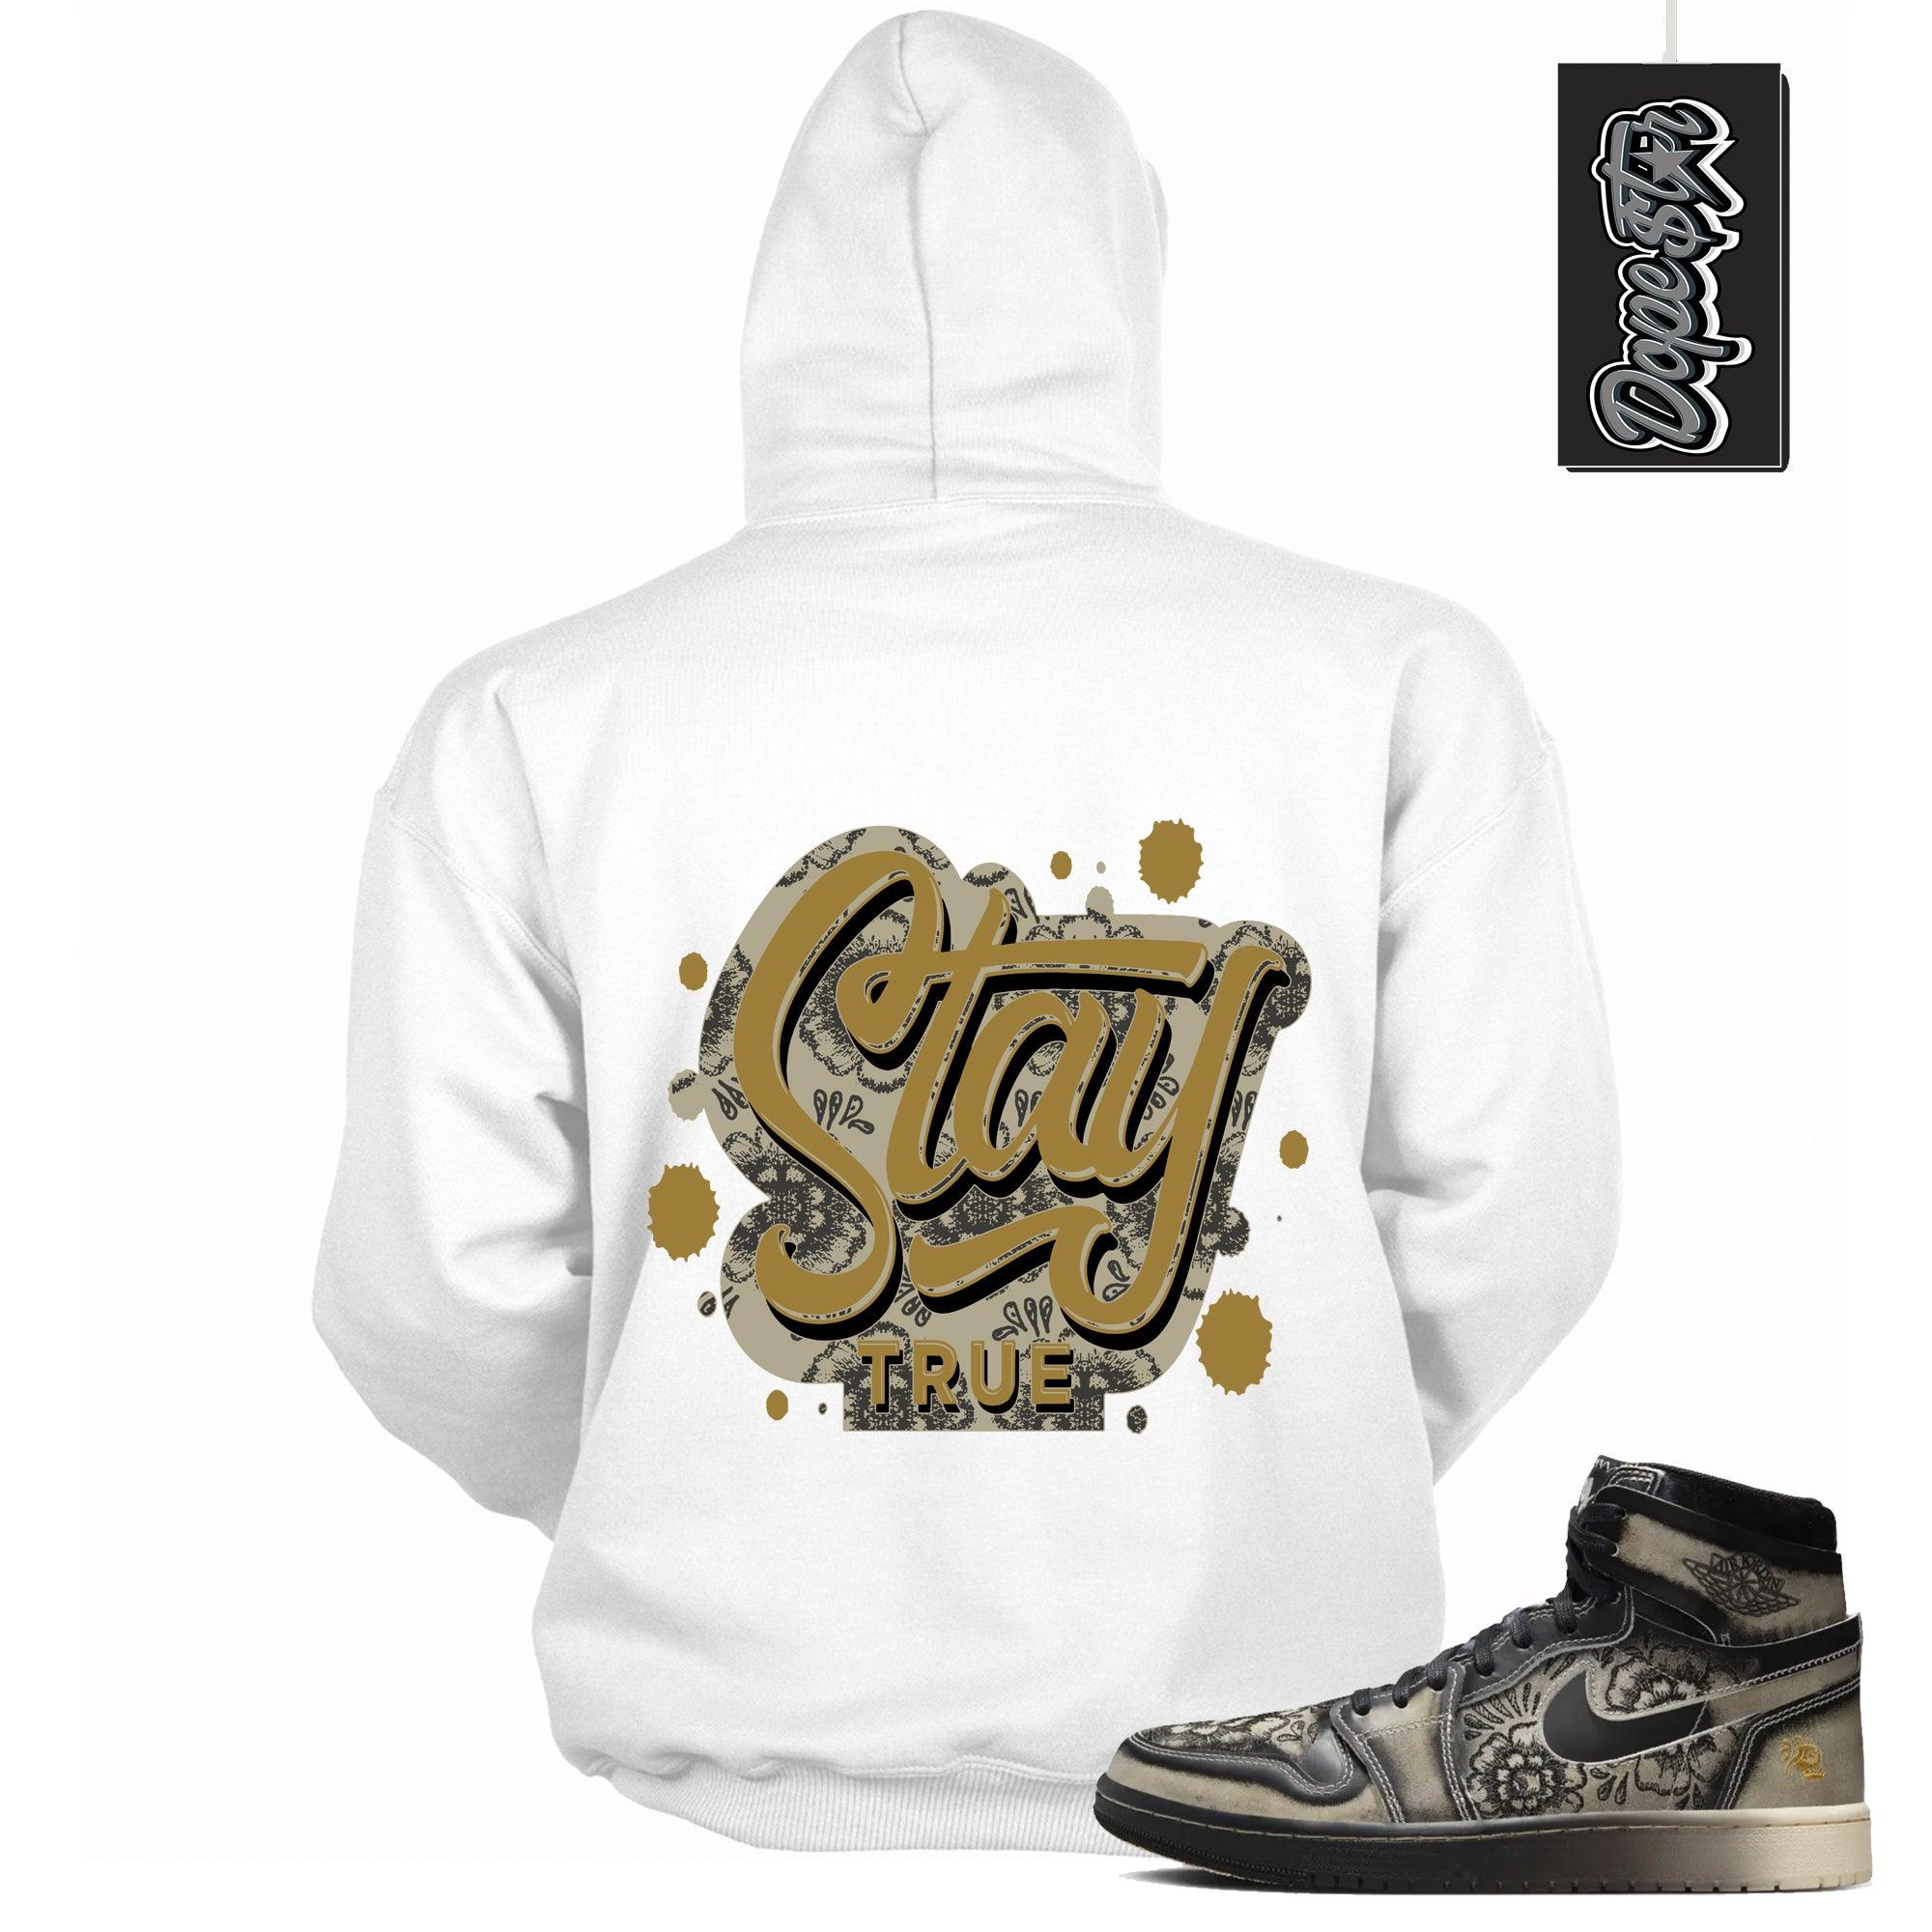 Cool White Graphic Hoodie with “ Stay True “ print, that perfectly matches Air Jordan 1 High Zoom Comfort 2 Dia de Muertos Black and Pale Ivory sneakers